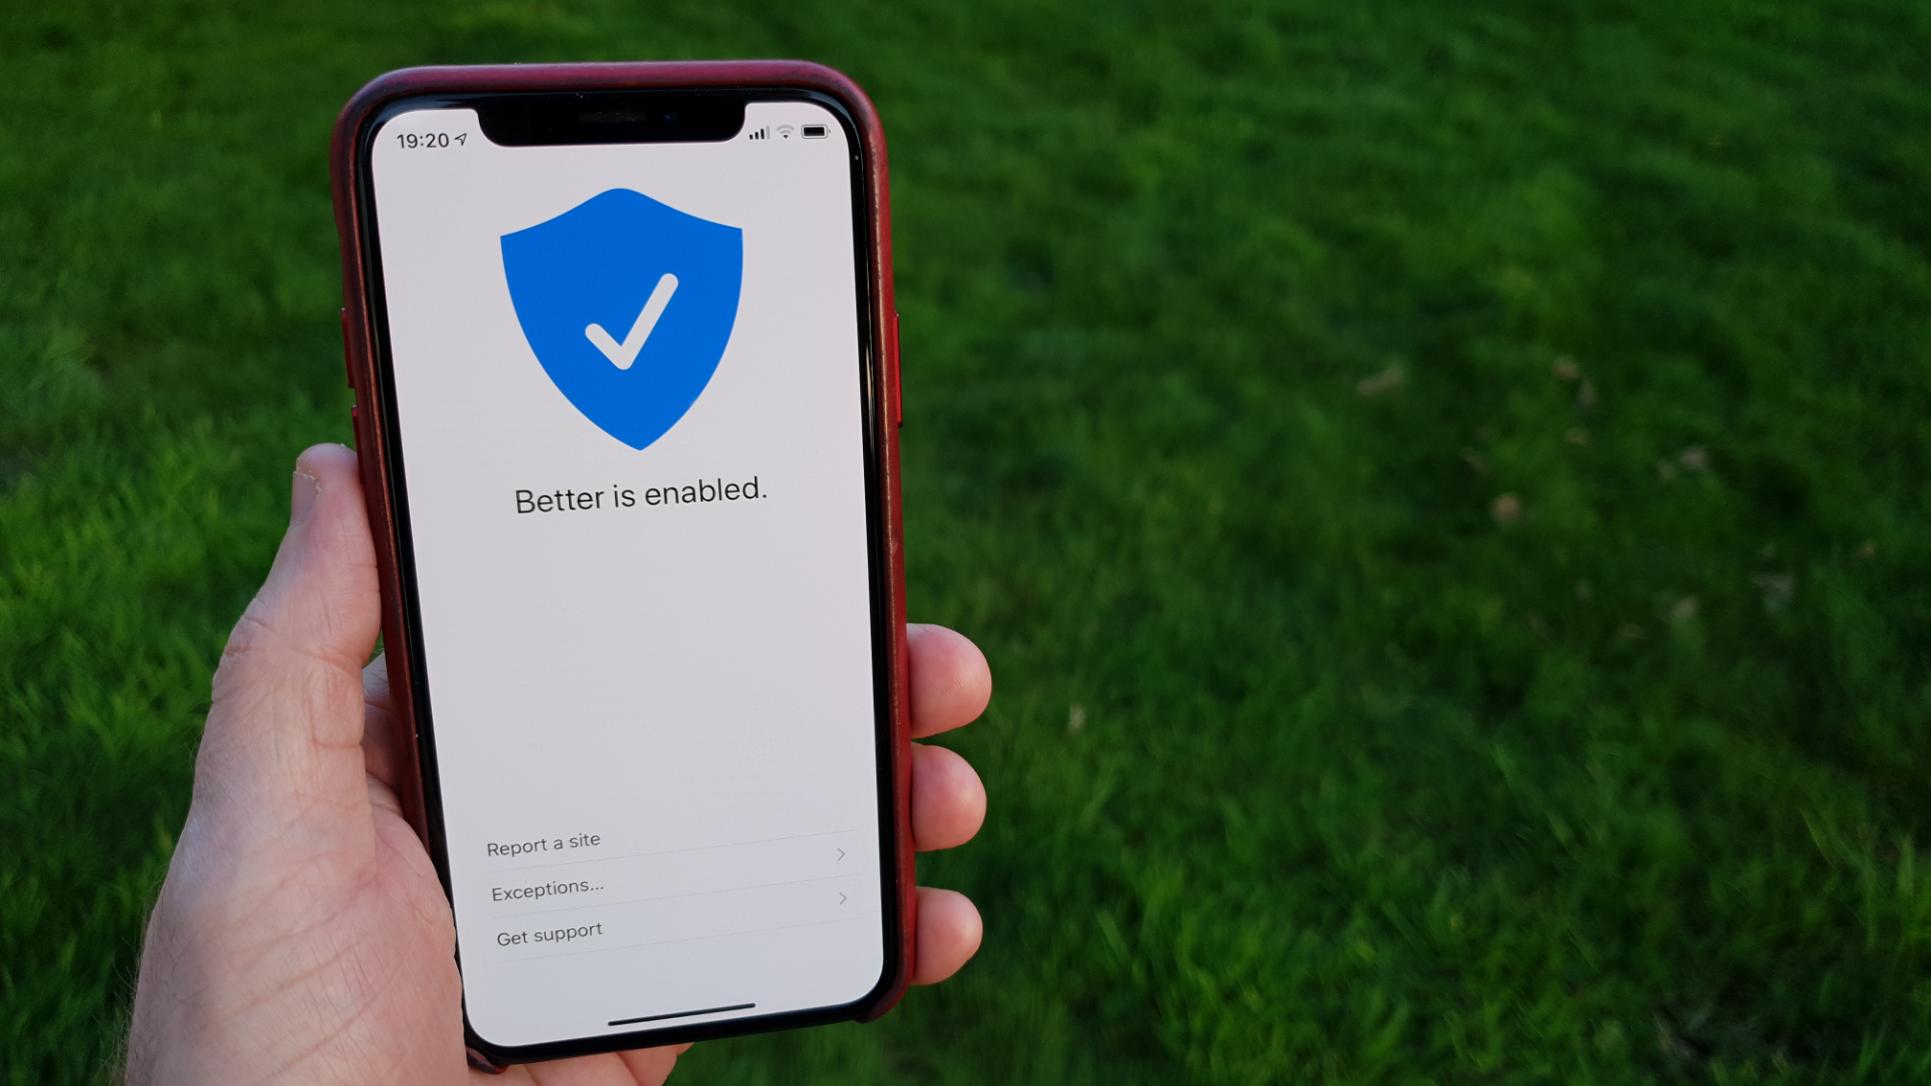 Photo of a hand, it mine, holding an iPhone X running the next bersion of Better. It is a simple, white screen with a blue shield that has a checkmark on it. Under the shield it says “Better is enabled.” On the bottom of the screen are three options: Report a site, Exceptions…, and Get support.